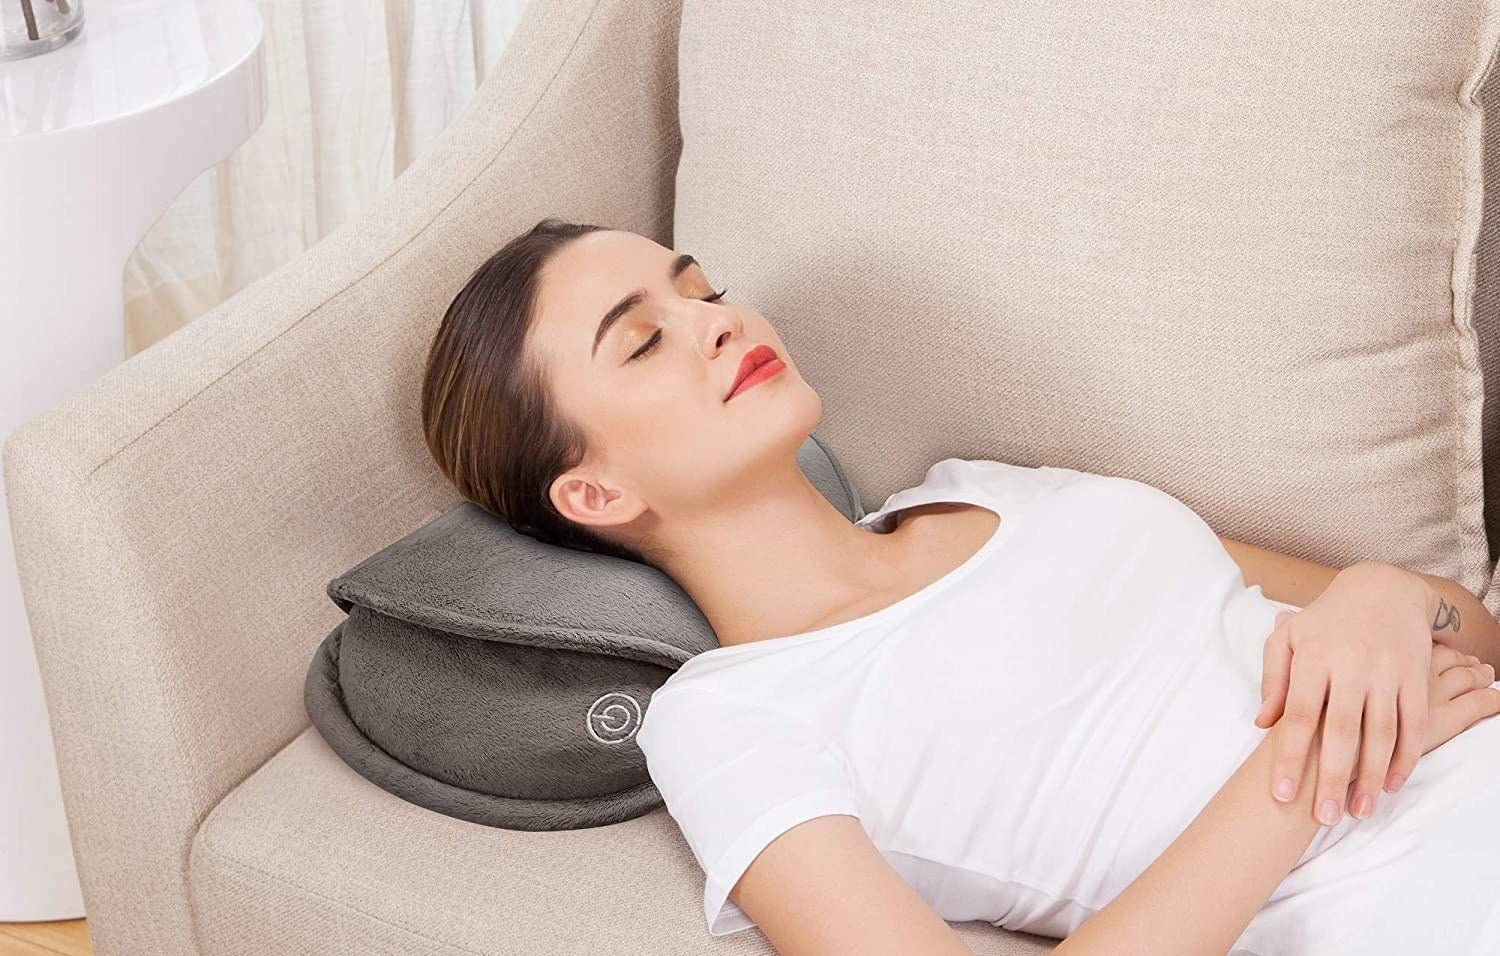 A person lying on a couch using the massage pillow